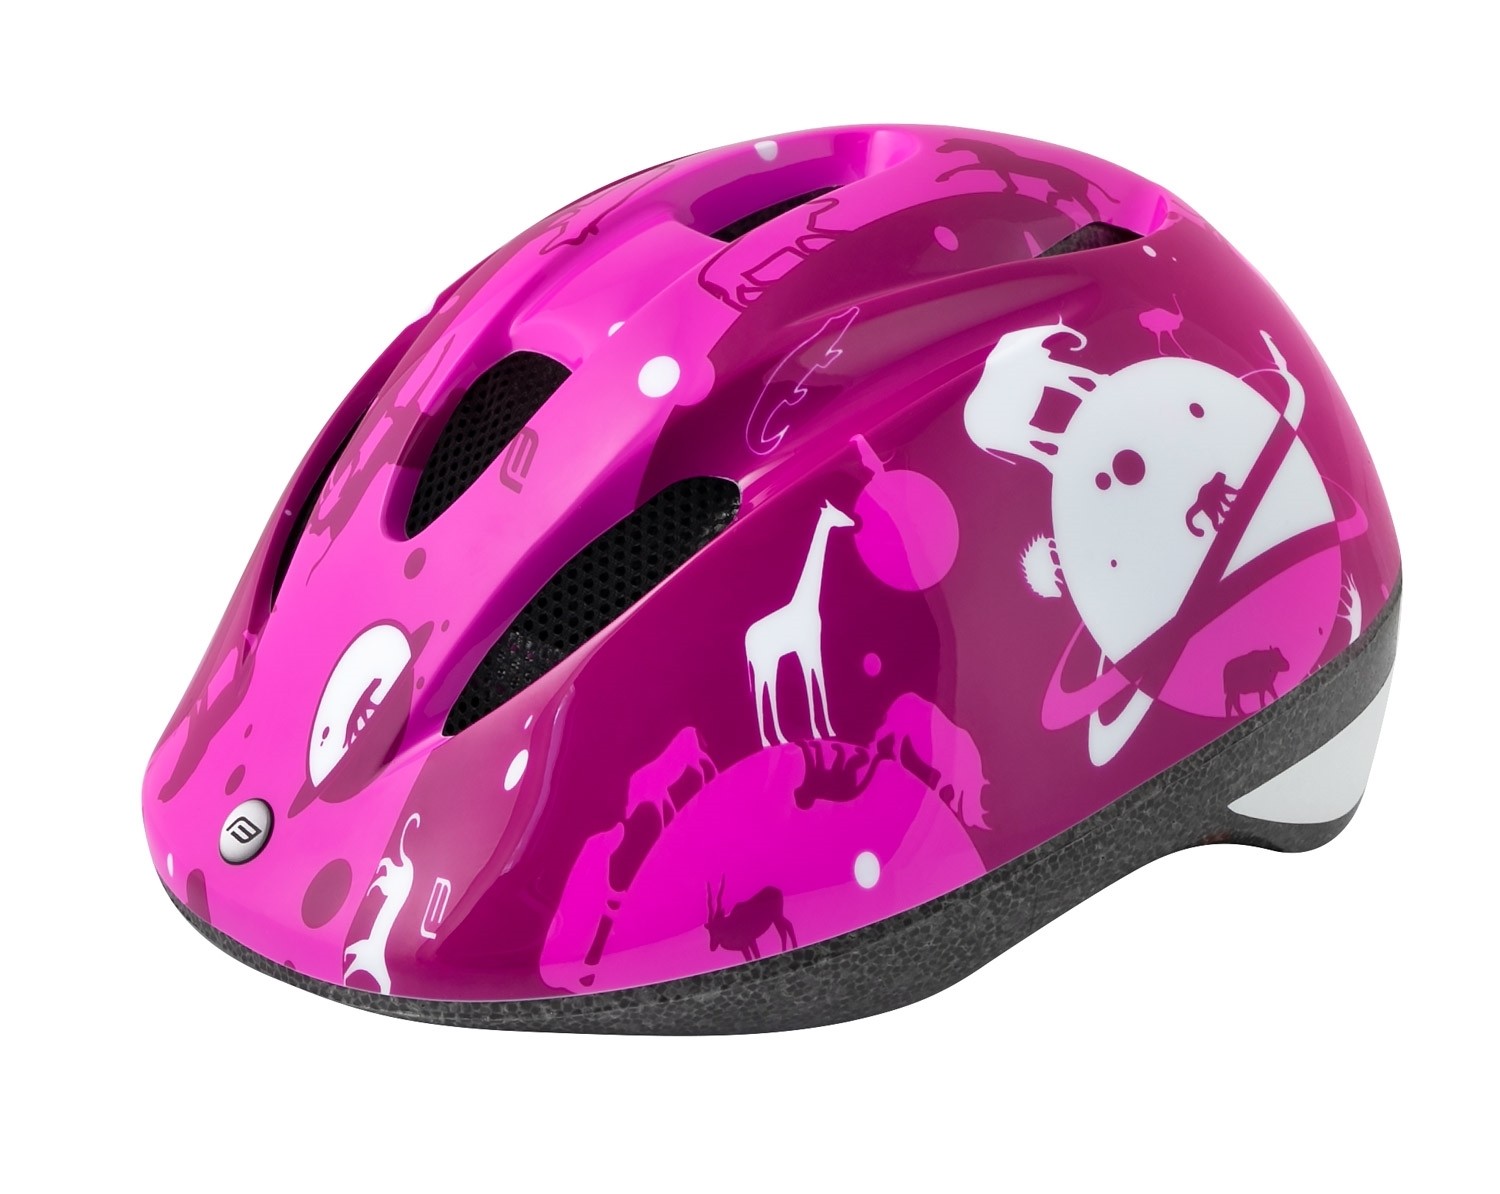 Casca Force Fun Planets Pink/White M